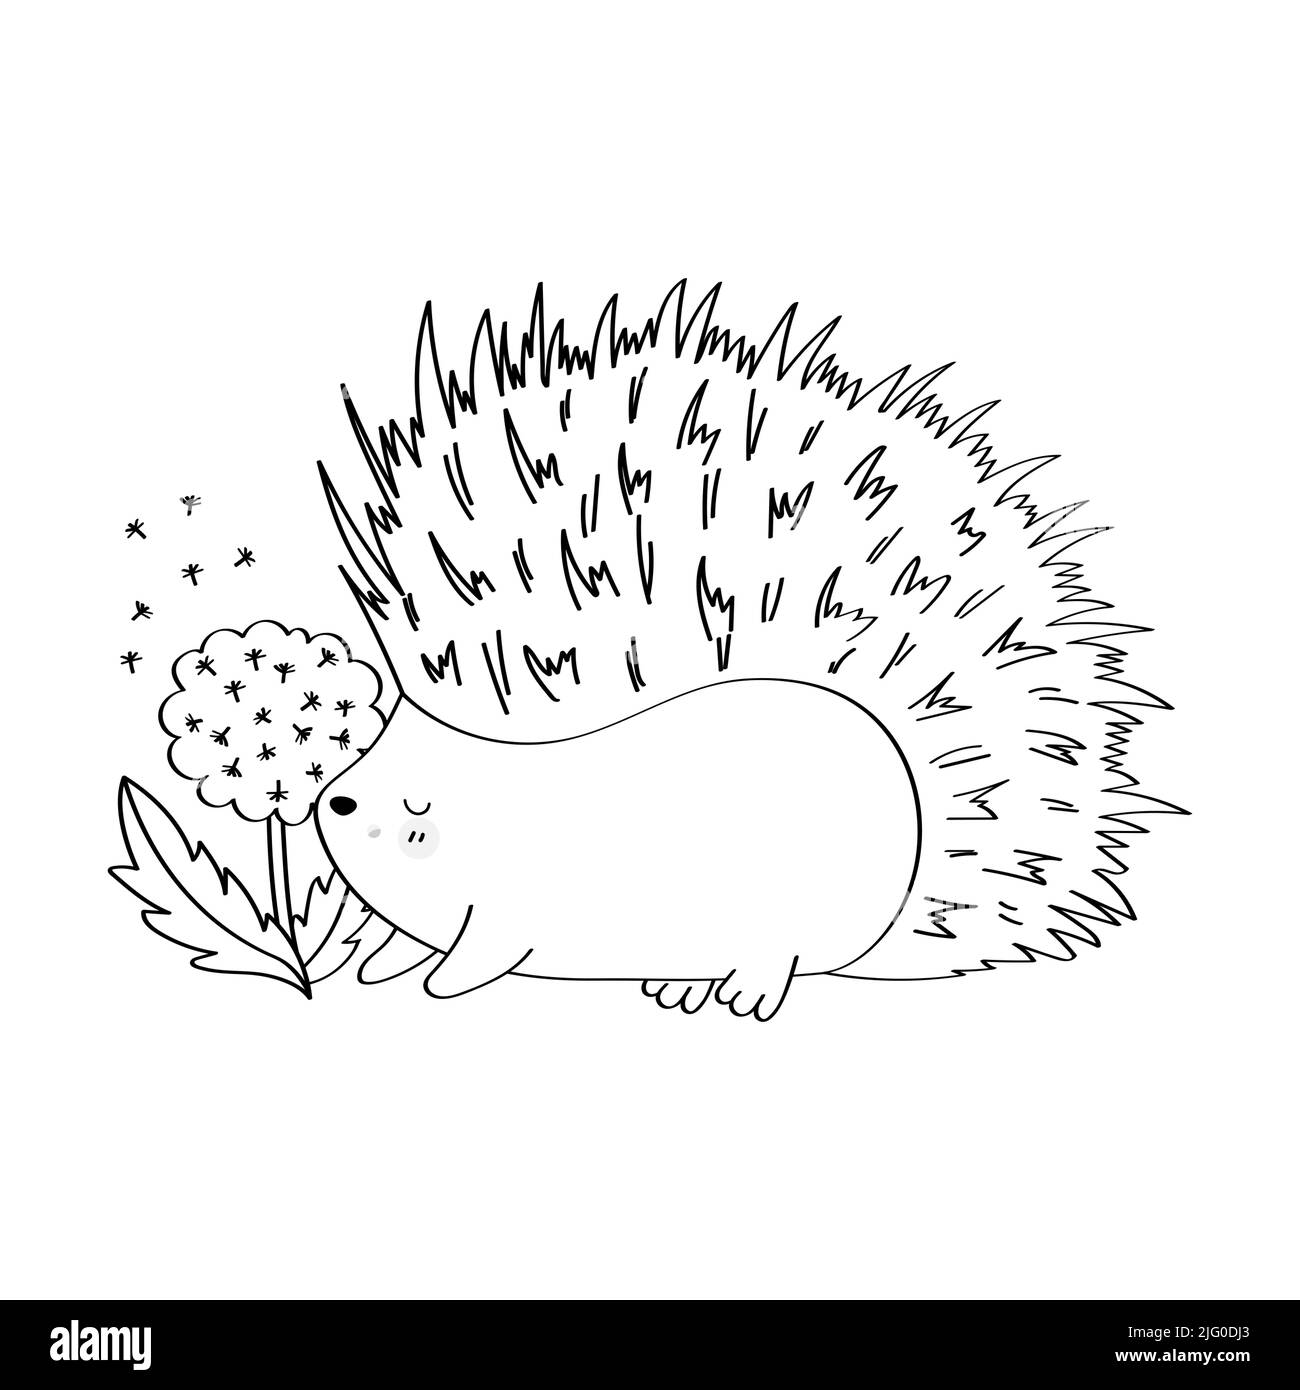 Clipart Hedgehog Coloring Page in Cartoon Style. Cute Clip Art Hedgehog Black and White. Vector Illustration of an Forest Animal for Stickers, Baby Stock Vector